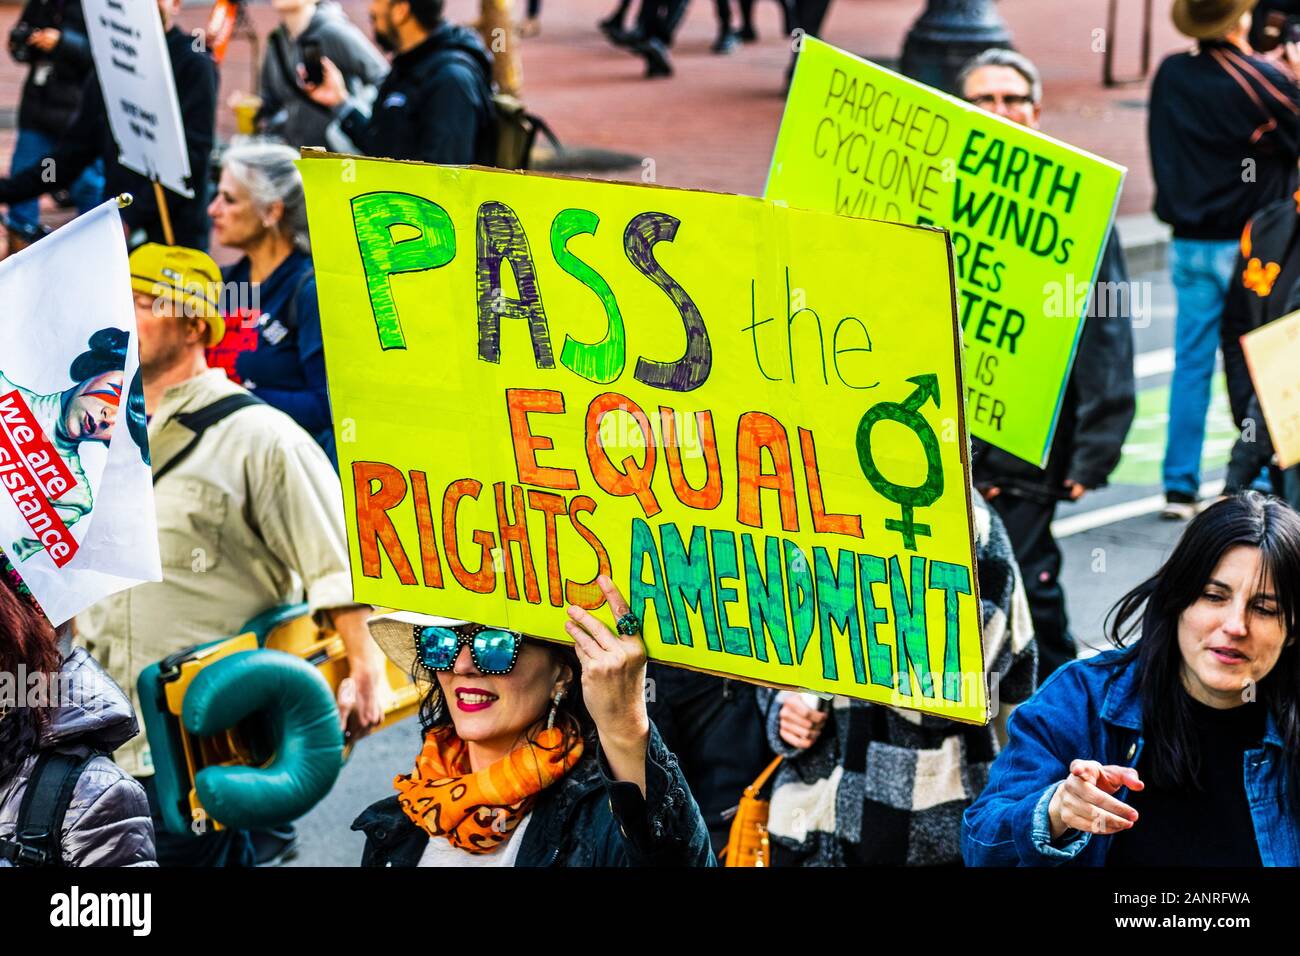 Jan 18, 2020 San Francisco / CA / USA - Participant to the Women's March event holds 'Pass the Equal Rights Movement' sign while marching on Market st Stock Photo